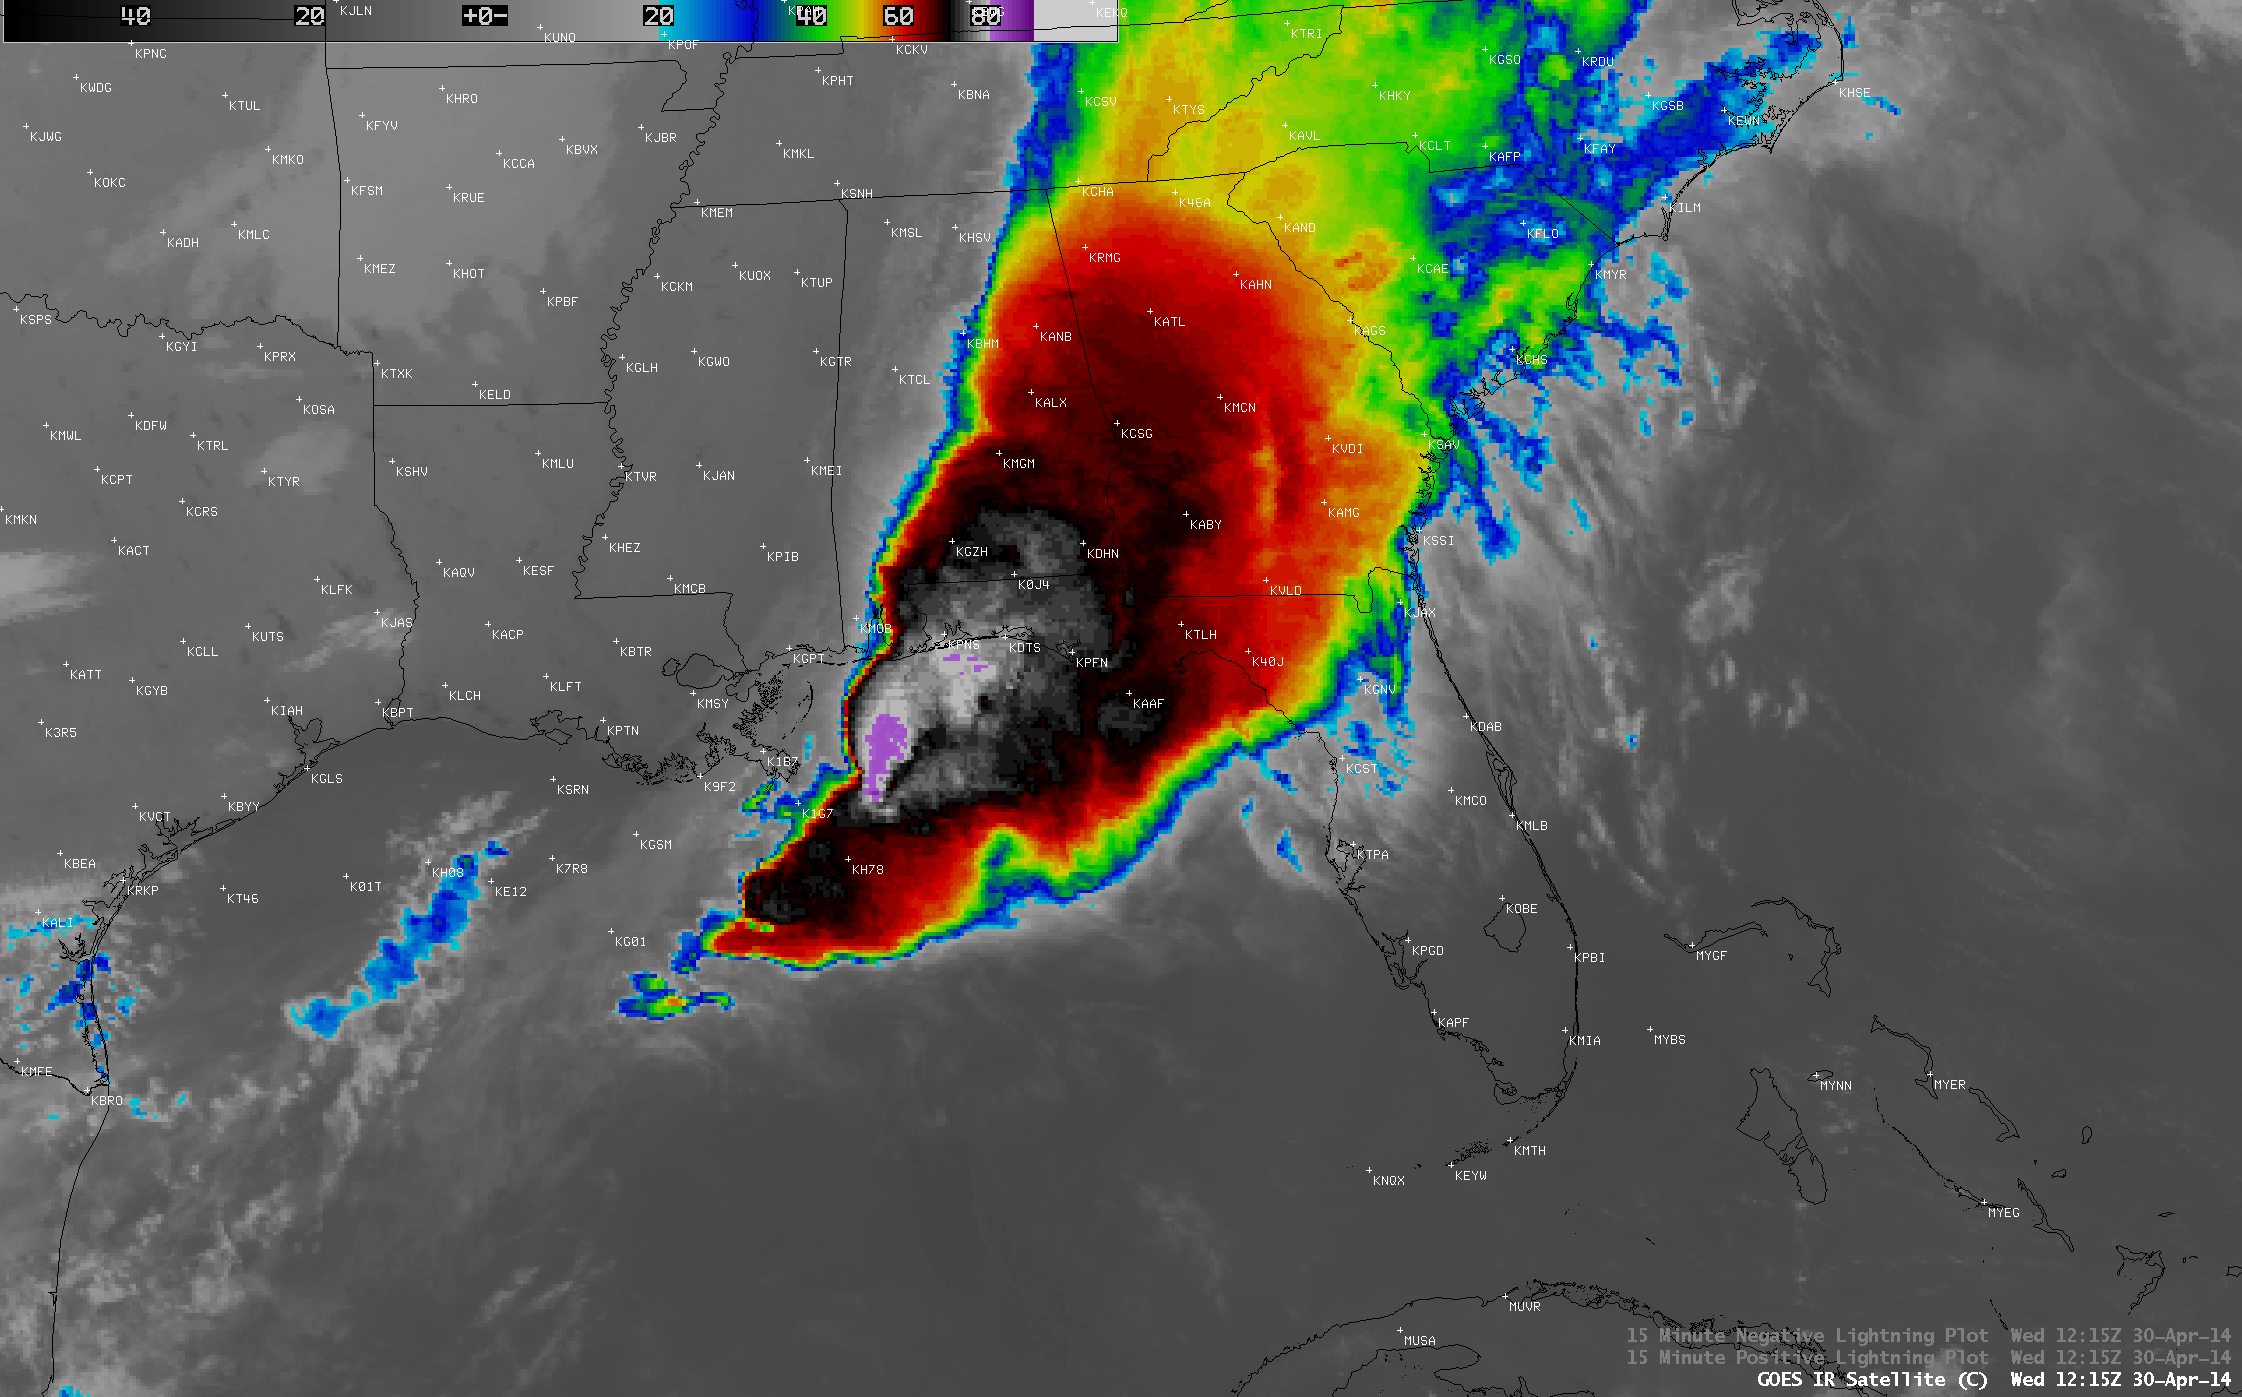 GOES-13 10.7 µm IR channel images (click to play animation)